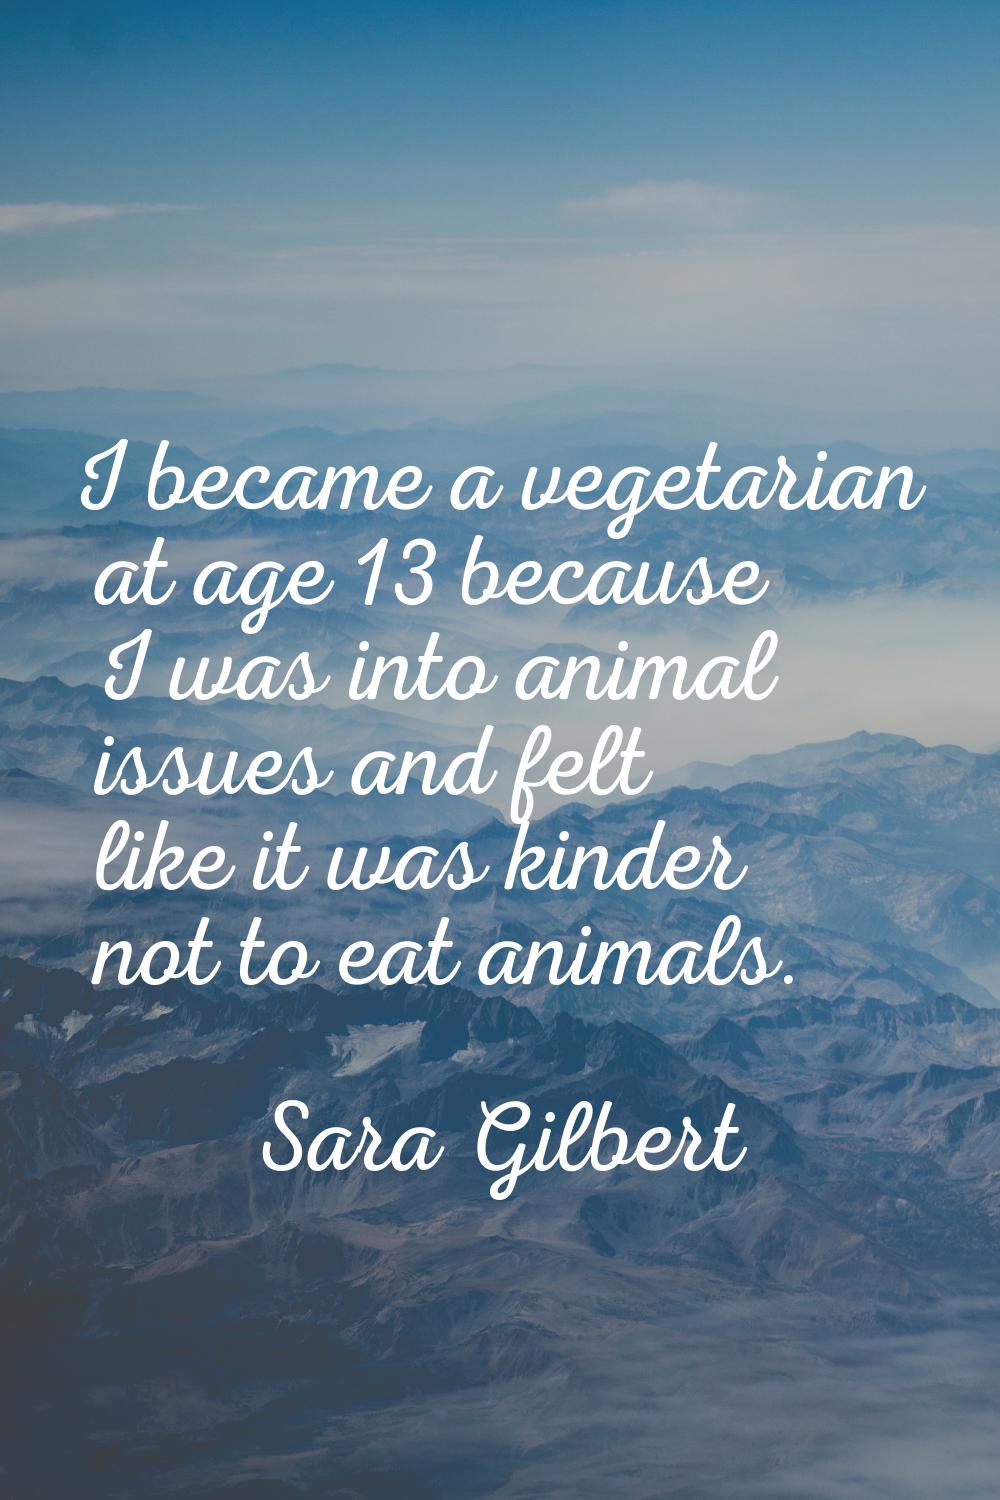 I became a vegetarian at age 13 because I was into animal issues and felt like it was kinder not to